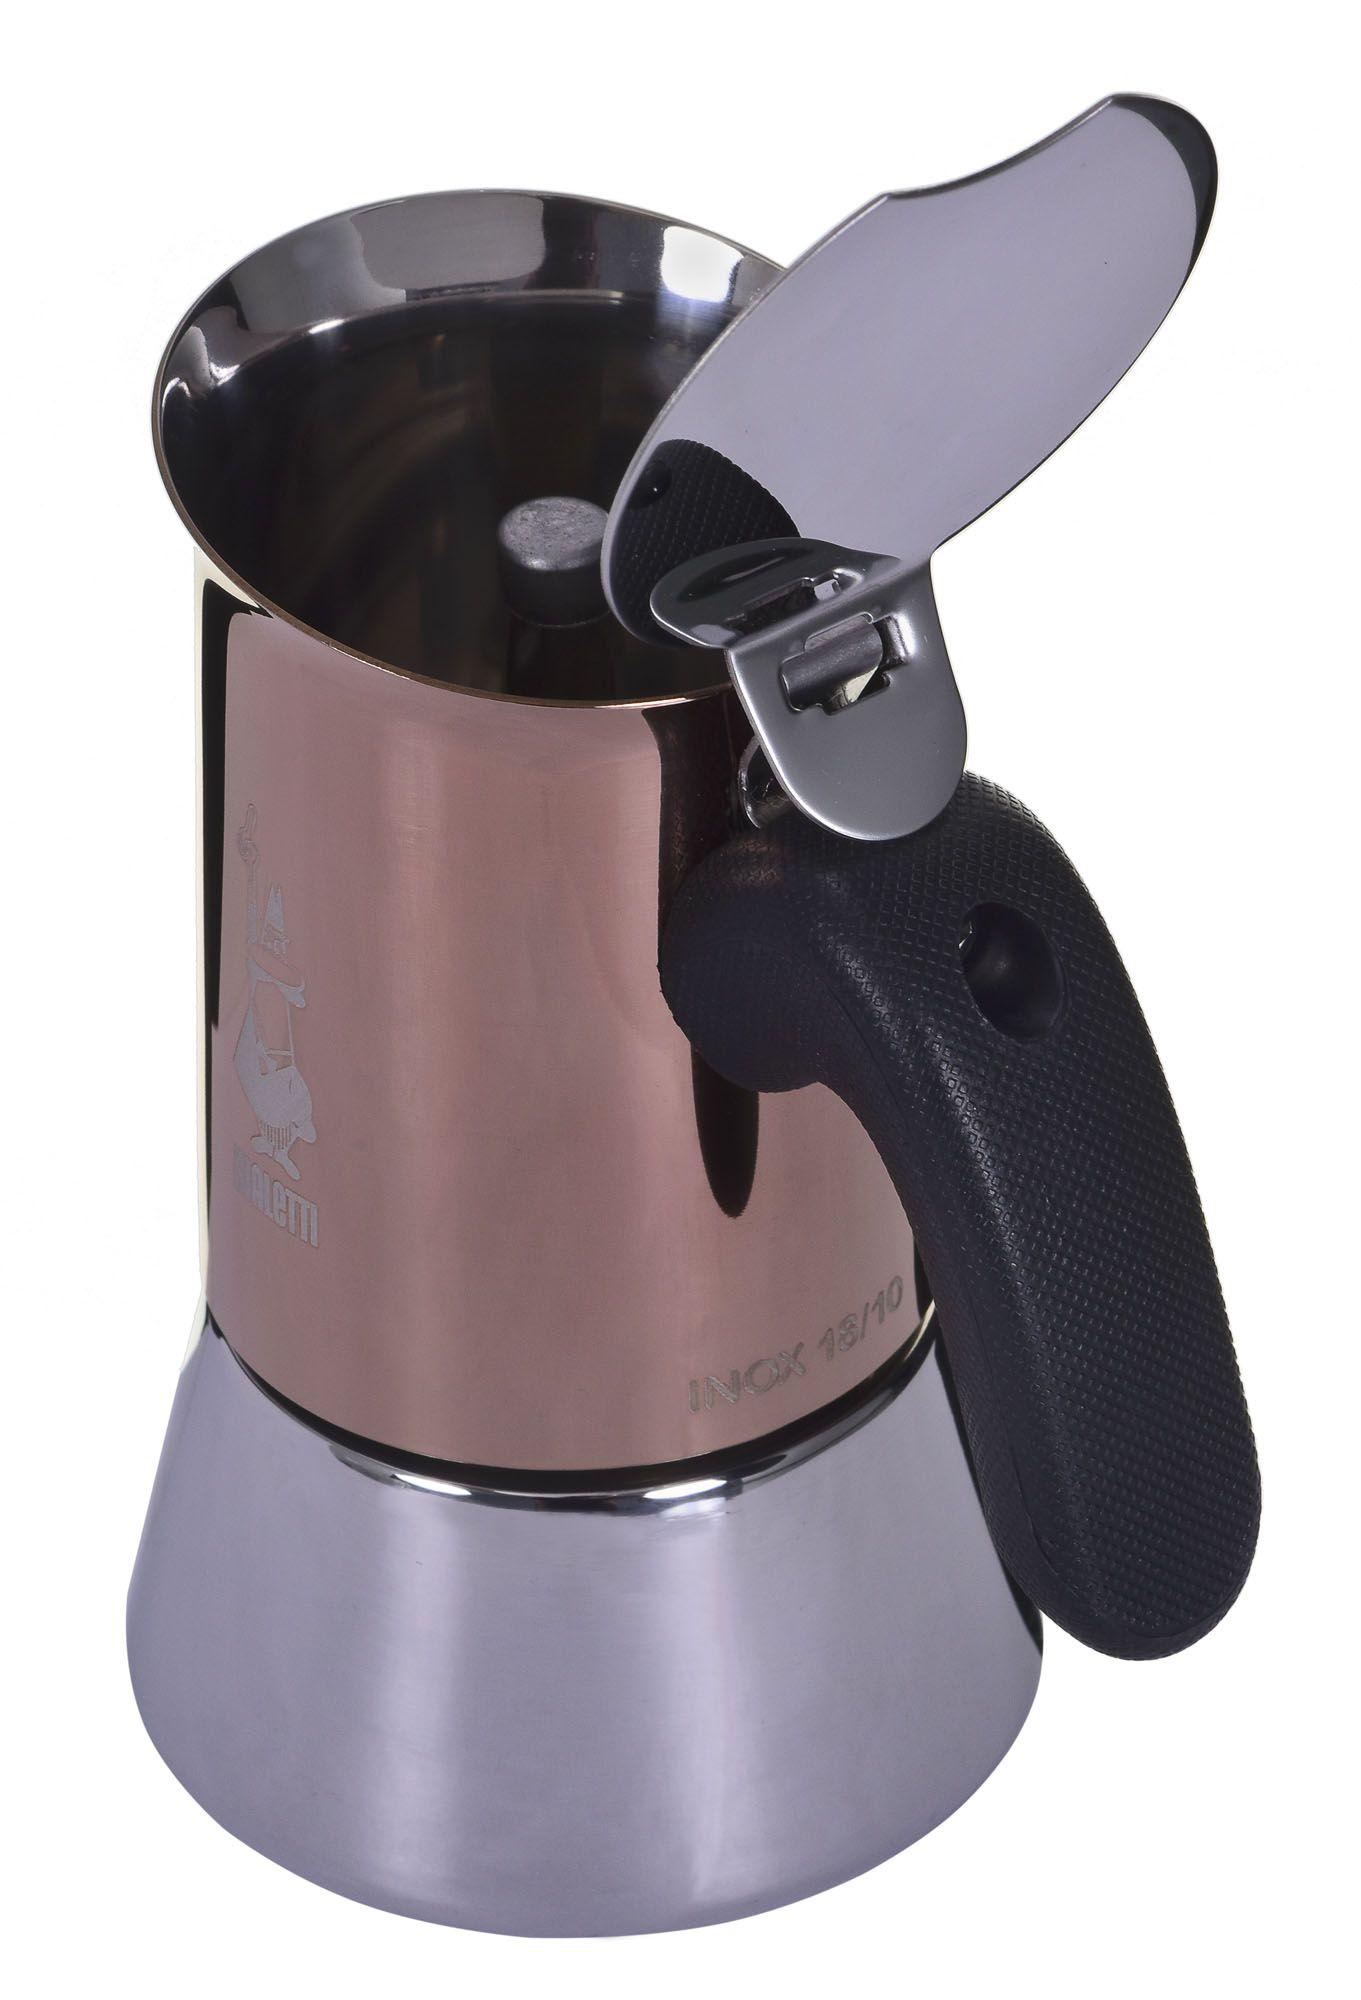 Bialetti Venus 2 Cup Stainless Steel Coffee Maker, Copper